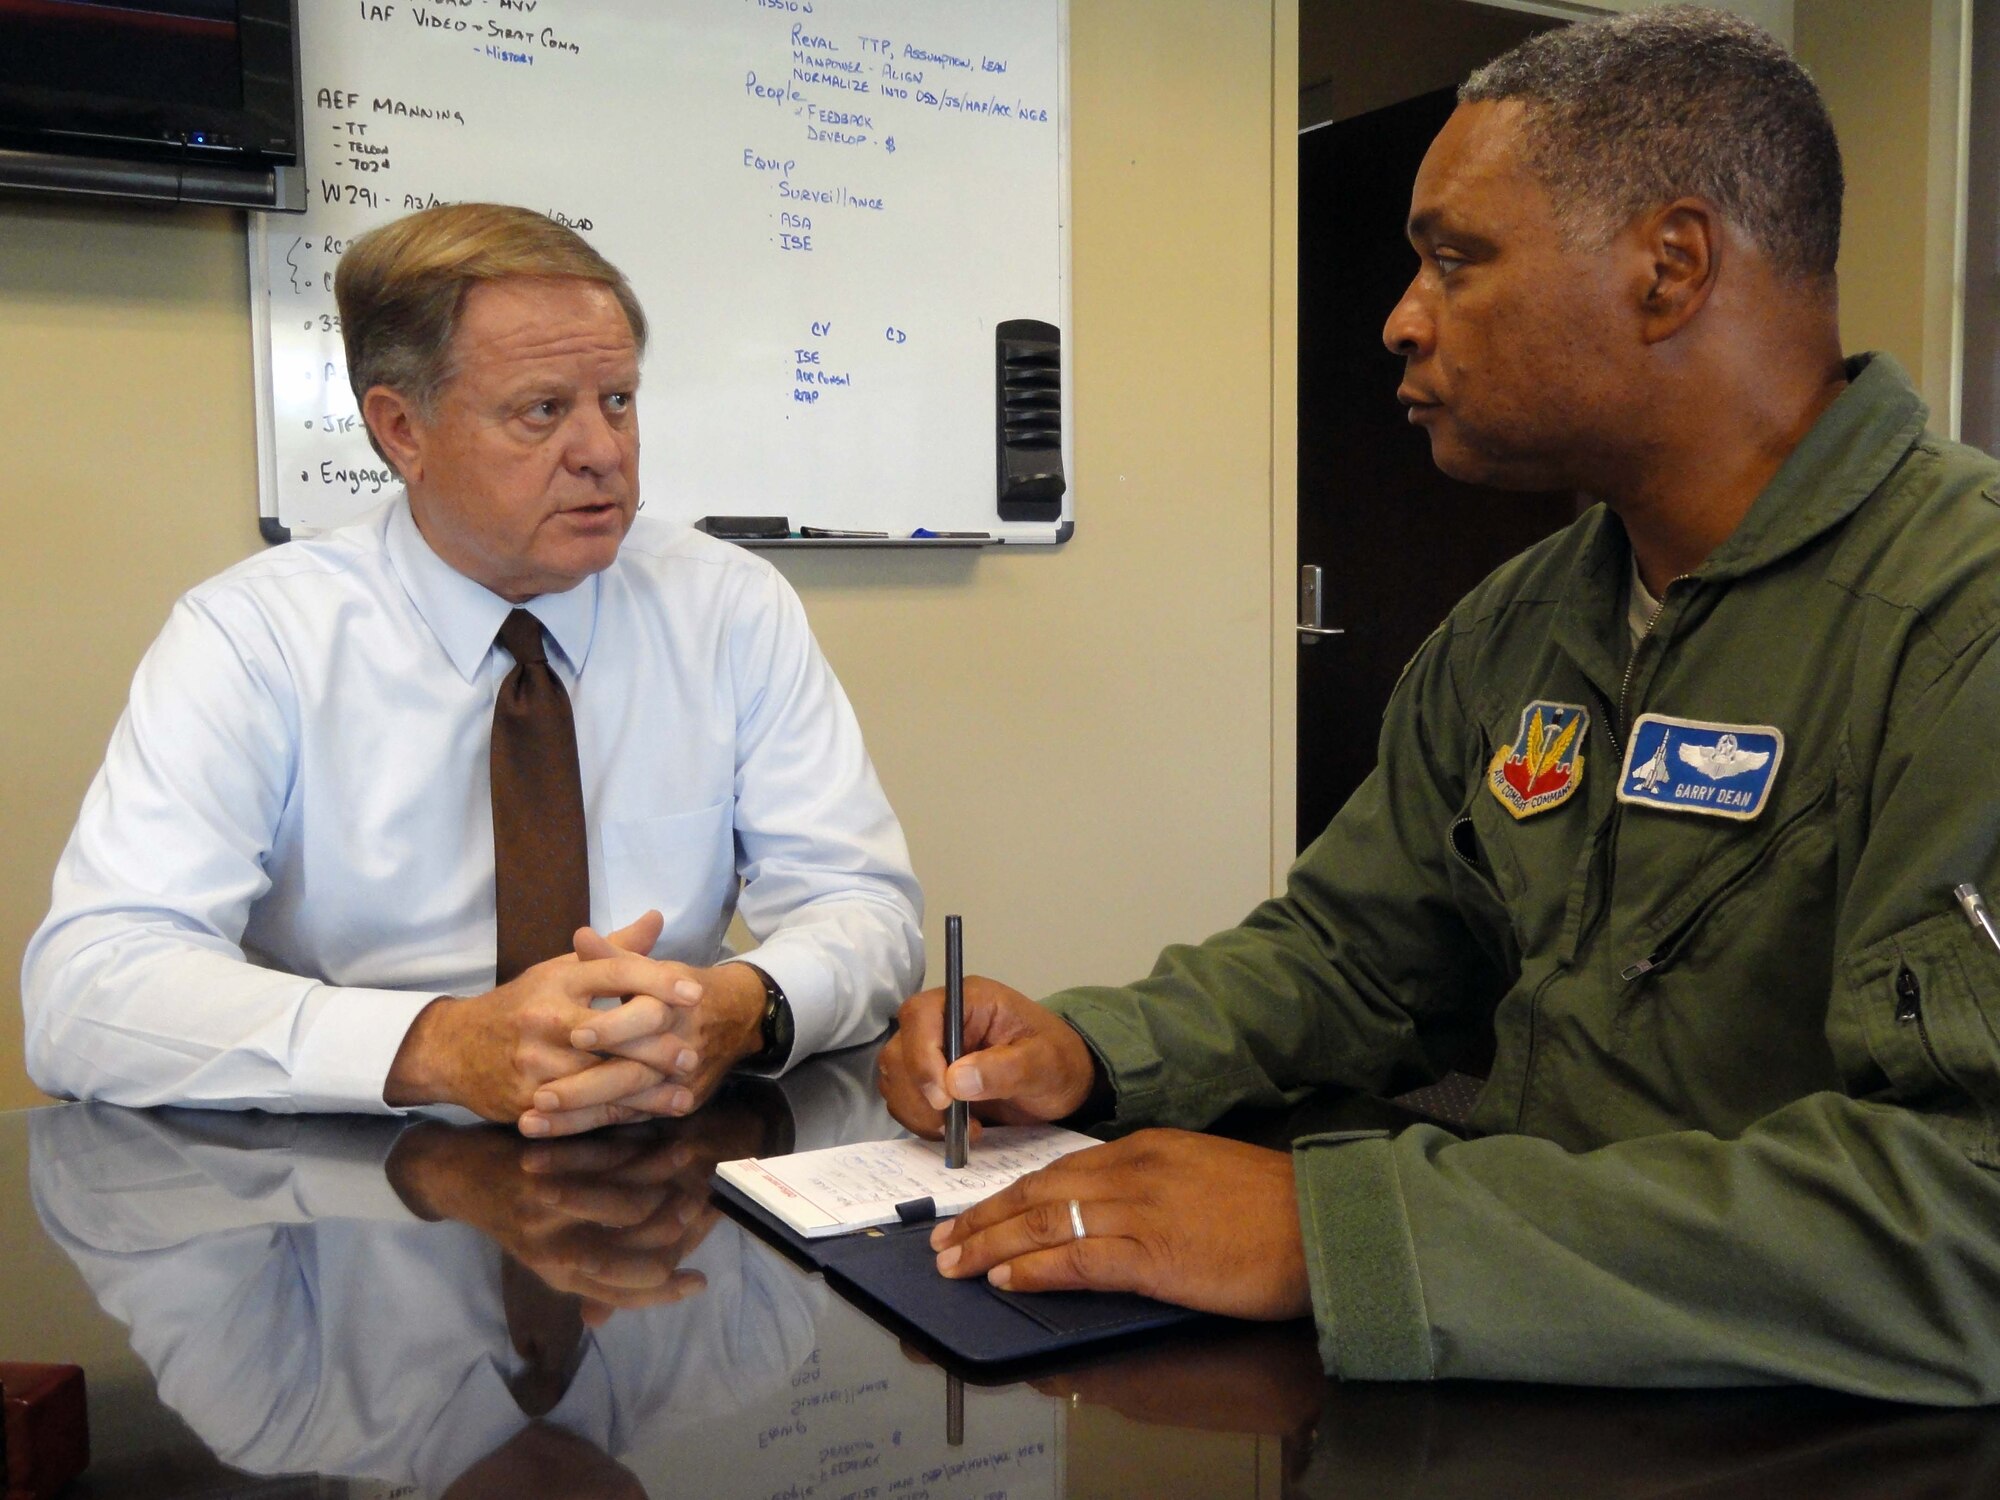 Gary Larson, left, political advisor for Air Forces Northern, meets with Maj. Gen. Garry C. Dean, AFNORTH commander, to advise him on issues pertaining to the command’s partnership with Mexico. The POLAD position at AFNORTH was created in 2010 when the Departments of Defense and State recognized how crucial foreign affairs were to the command. (U.S. Air Force photo by Angela Pope)